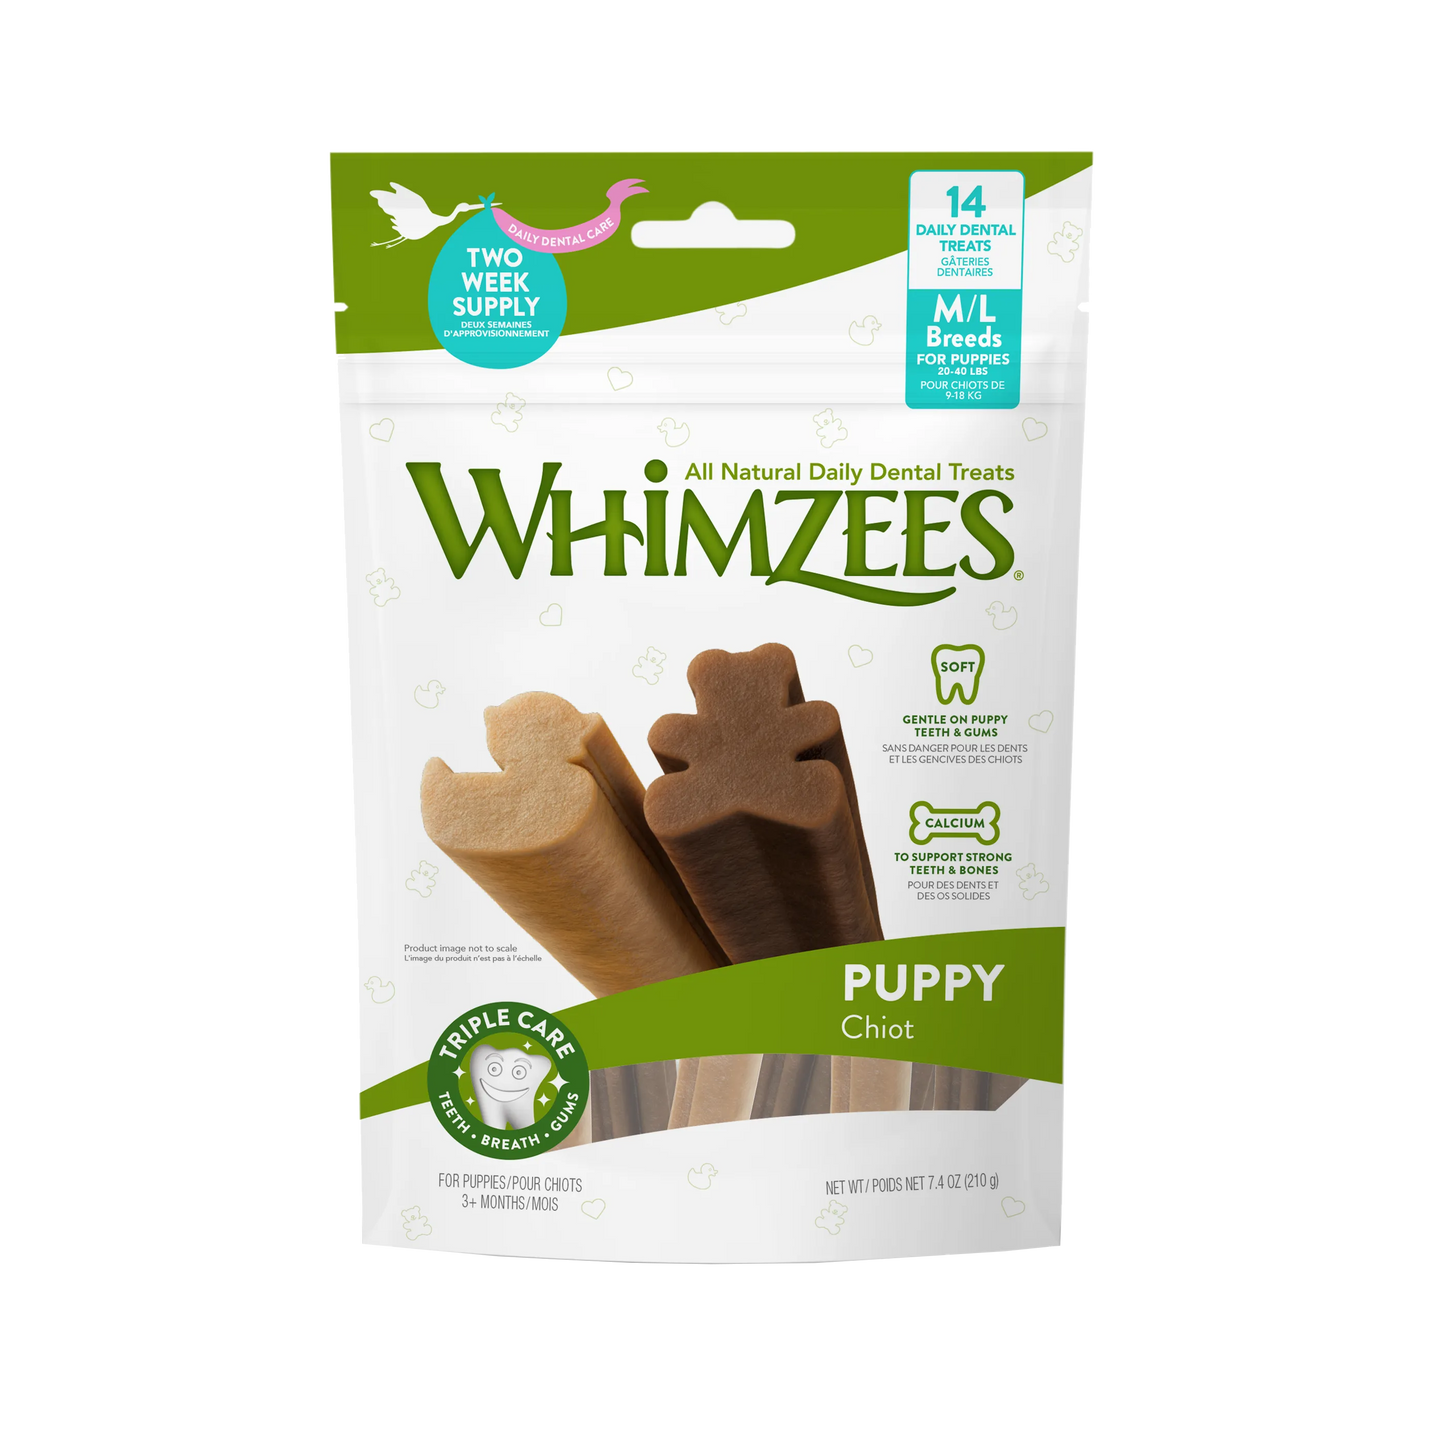 WHIMZEES DENTAL POUCHES - PUPPY